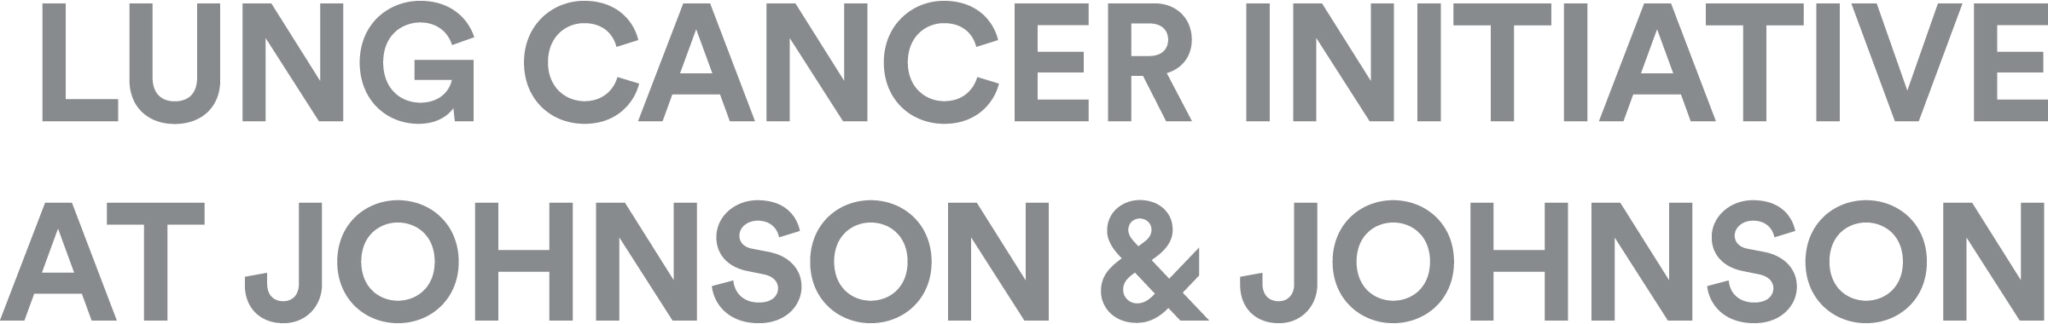 Lung Cancer Initiative at Johnson & Johnson